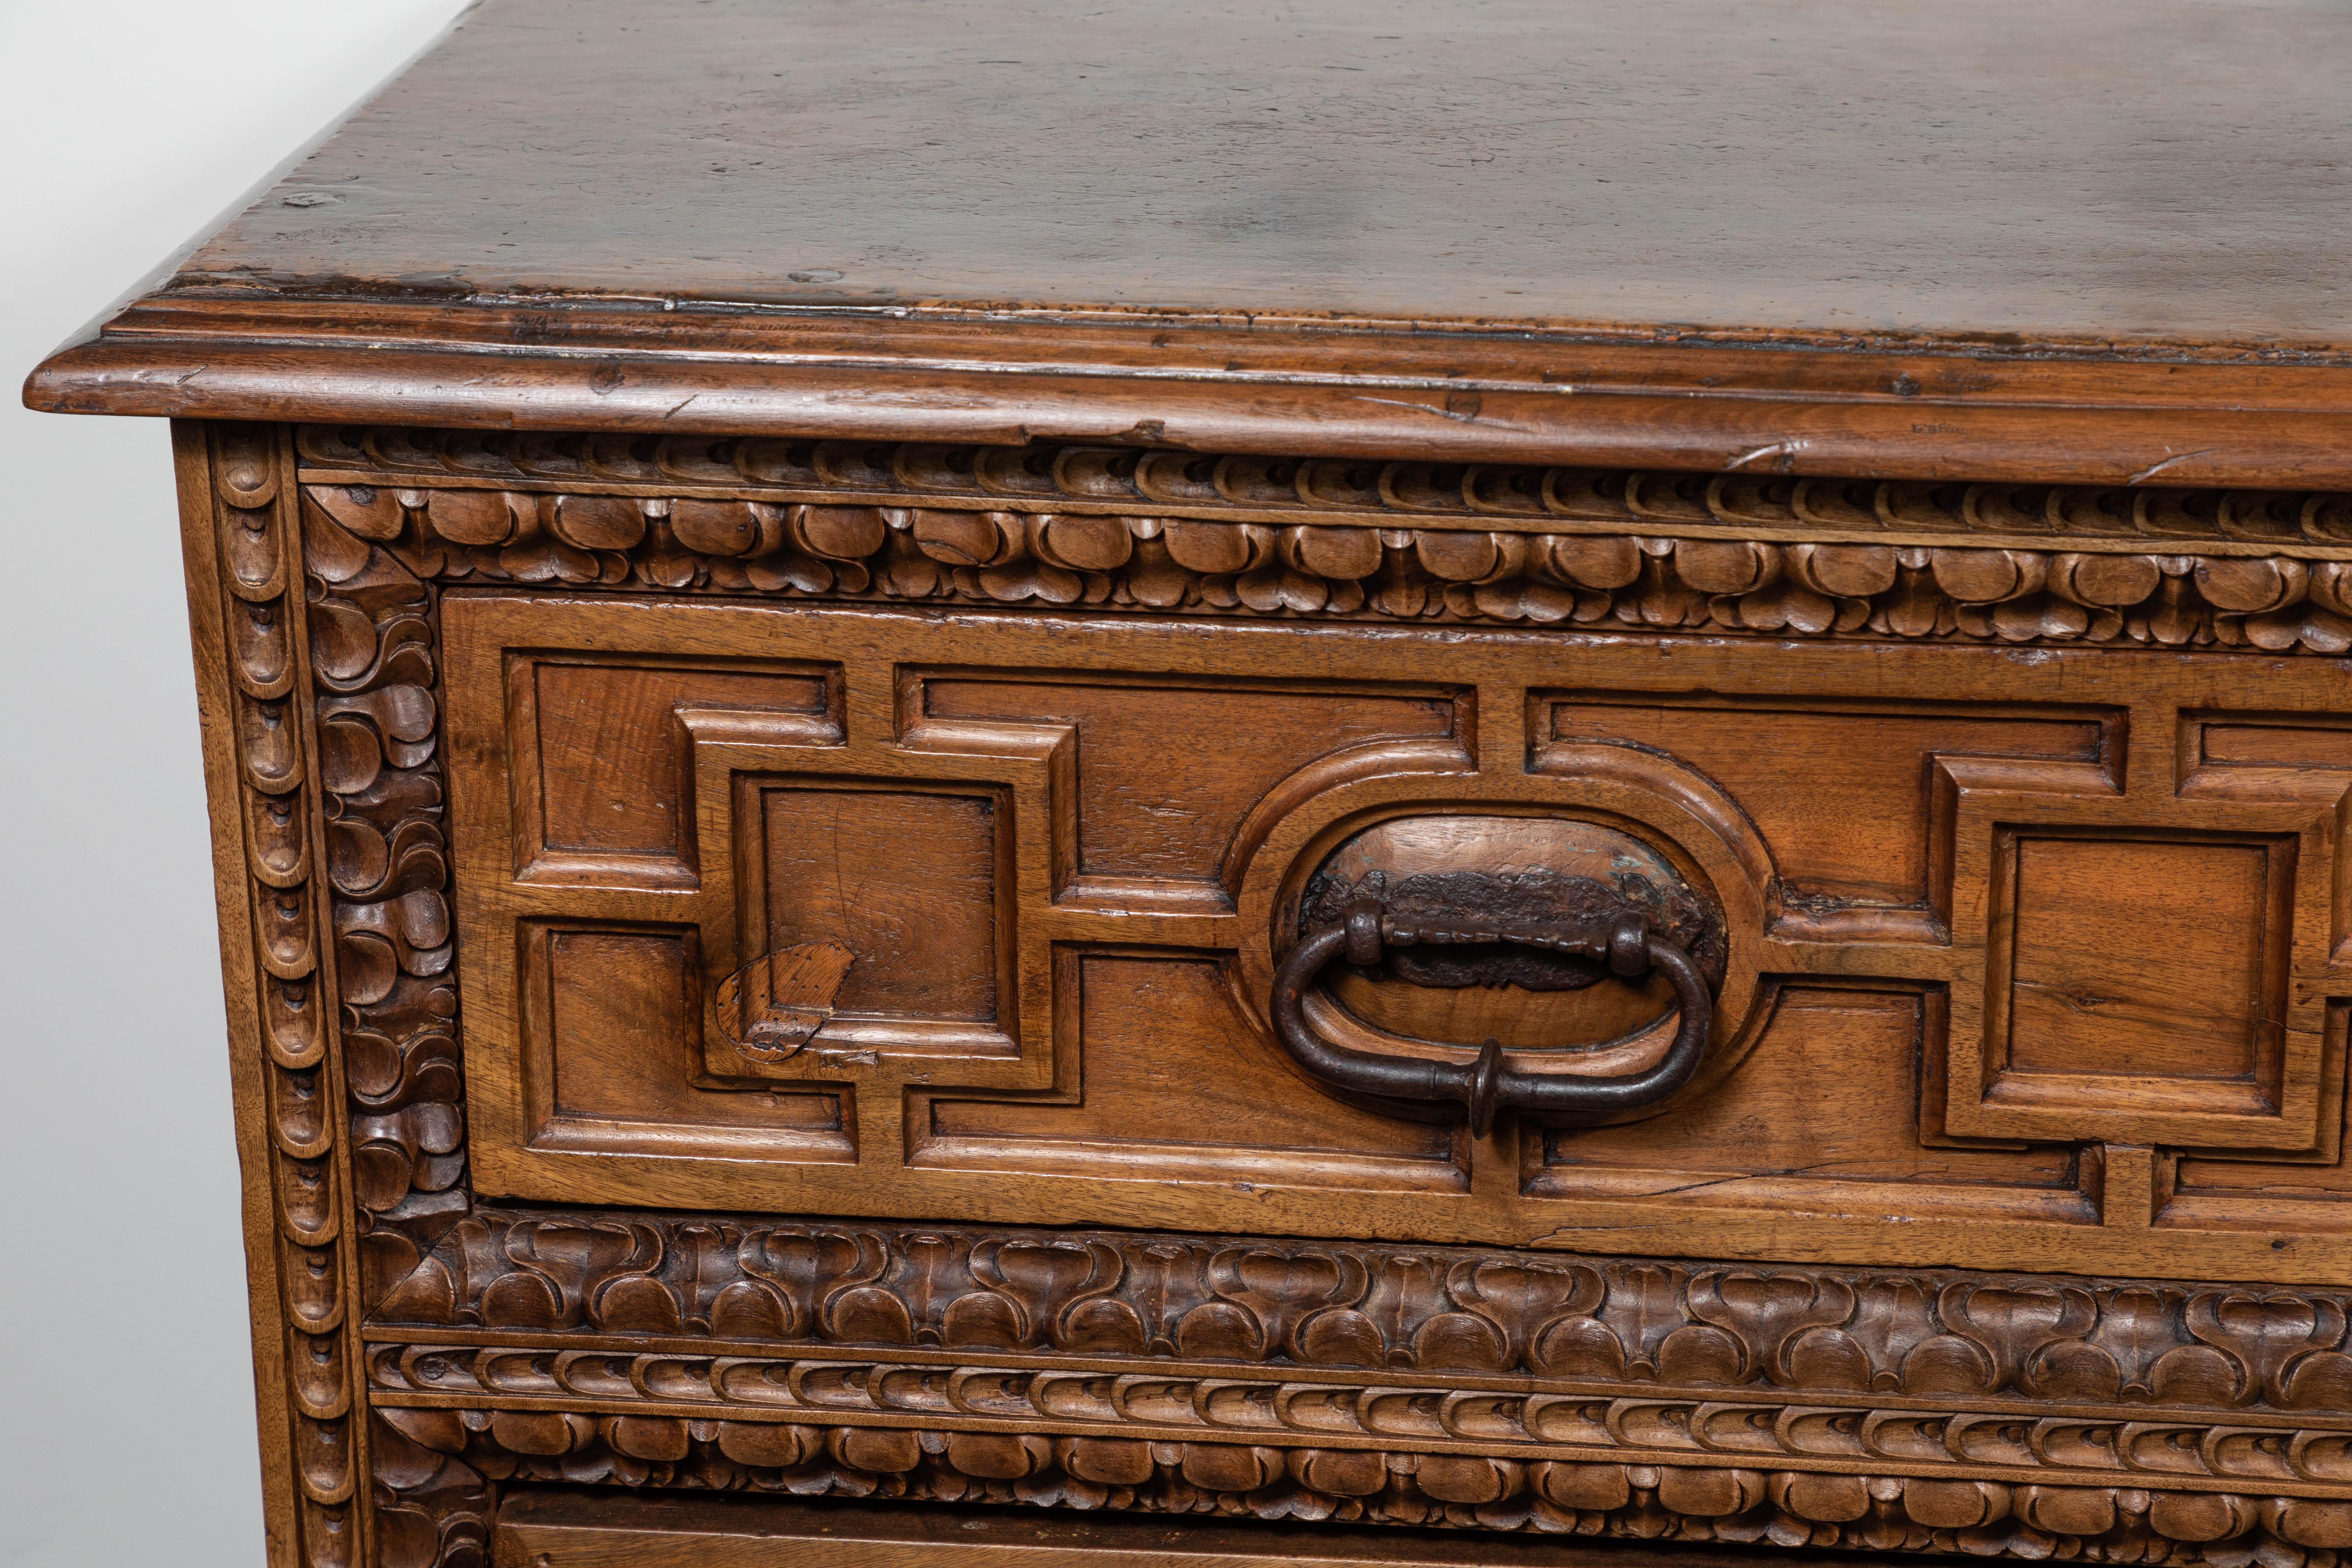 An 18th century, bleached oak, three drawer commode from Spain. Wonderful, coffered sides flank the relief drawers which are surrounded by a mix of stylized bands. This piece features its original, cast iron hardware.